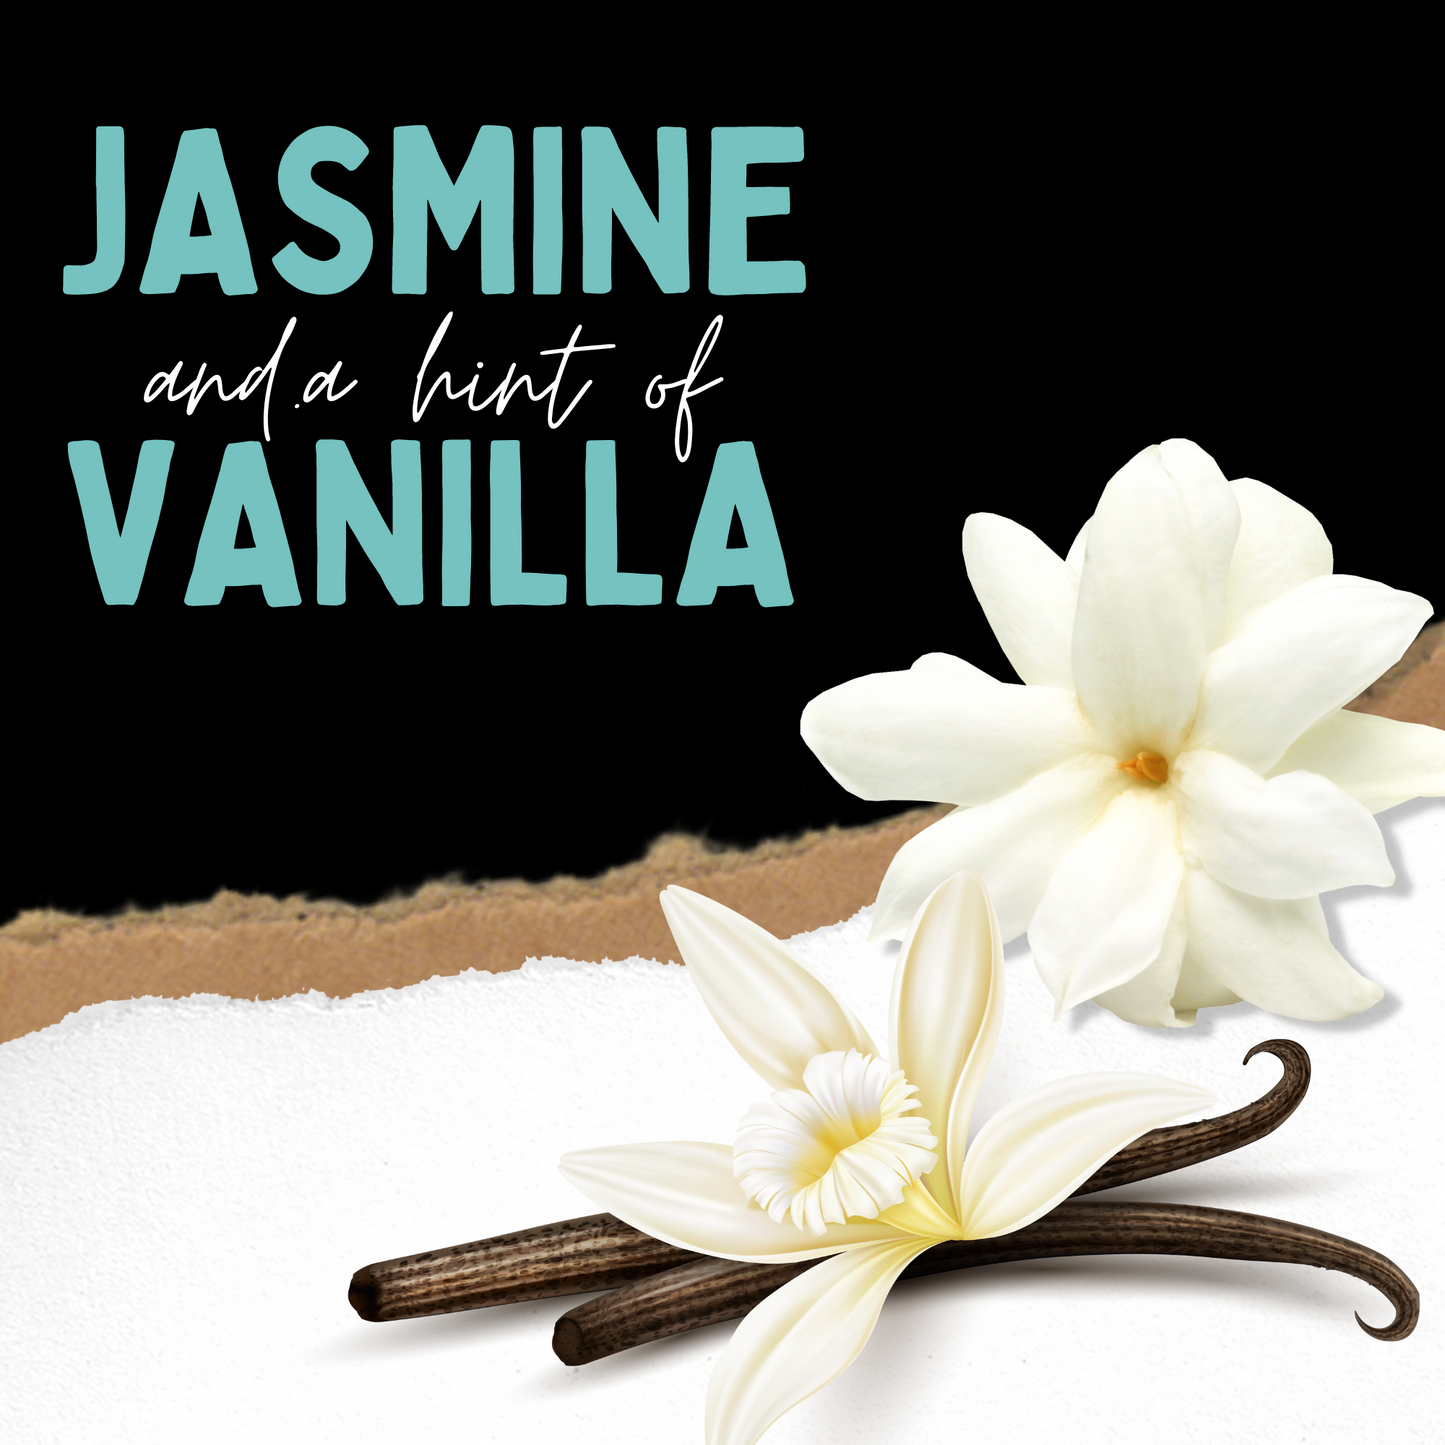 Life is Tough but so are You 8 oz Jasmine and Vanilla Scented Candle